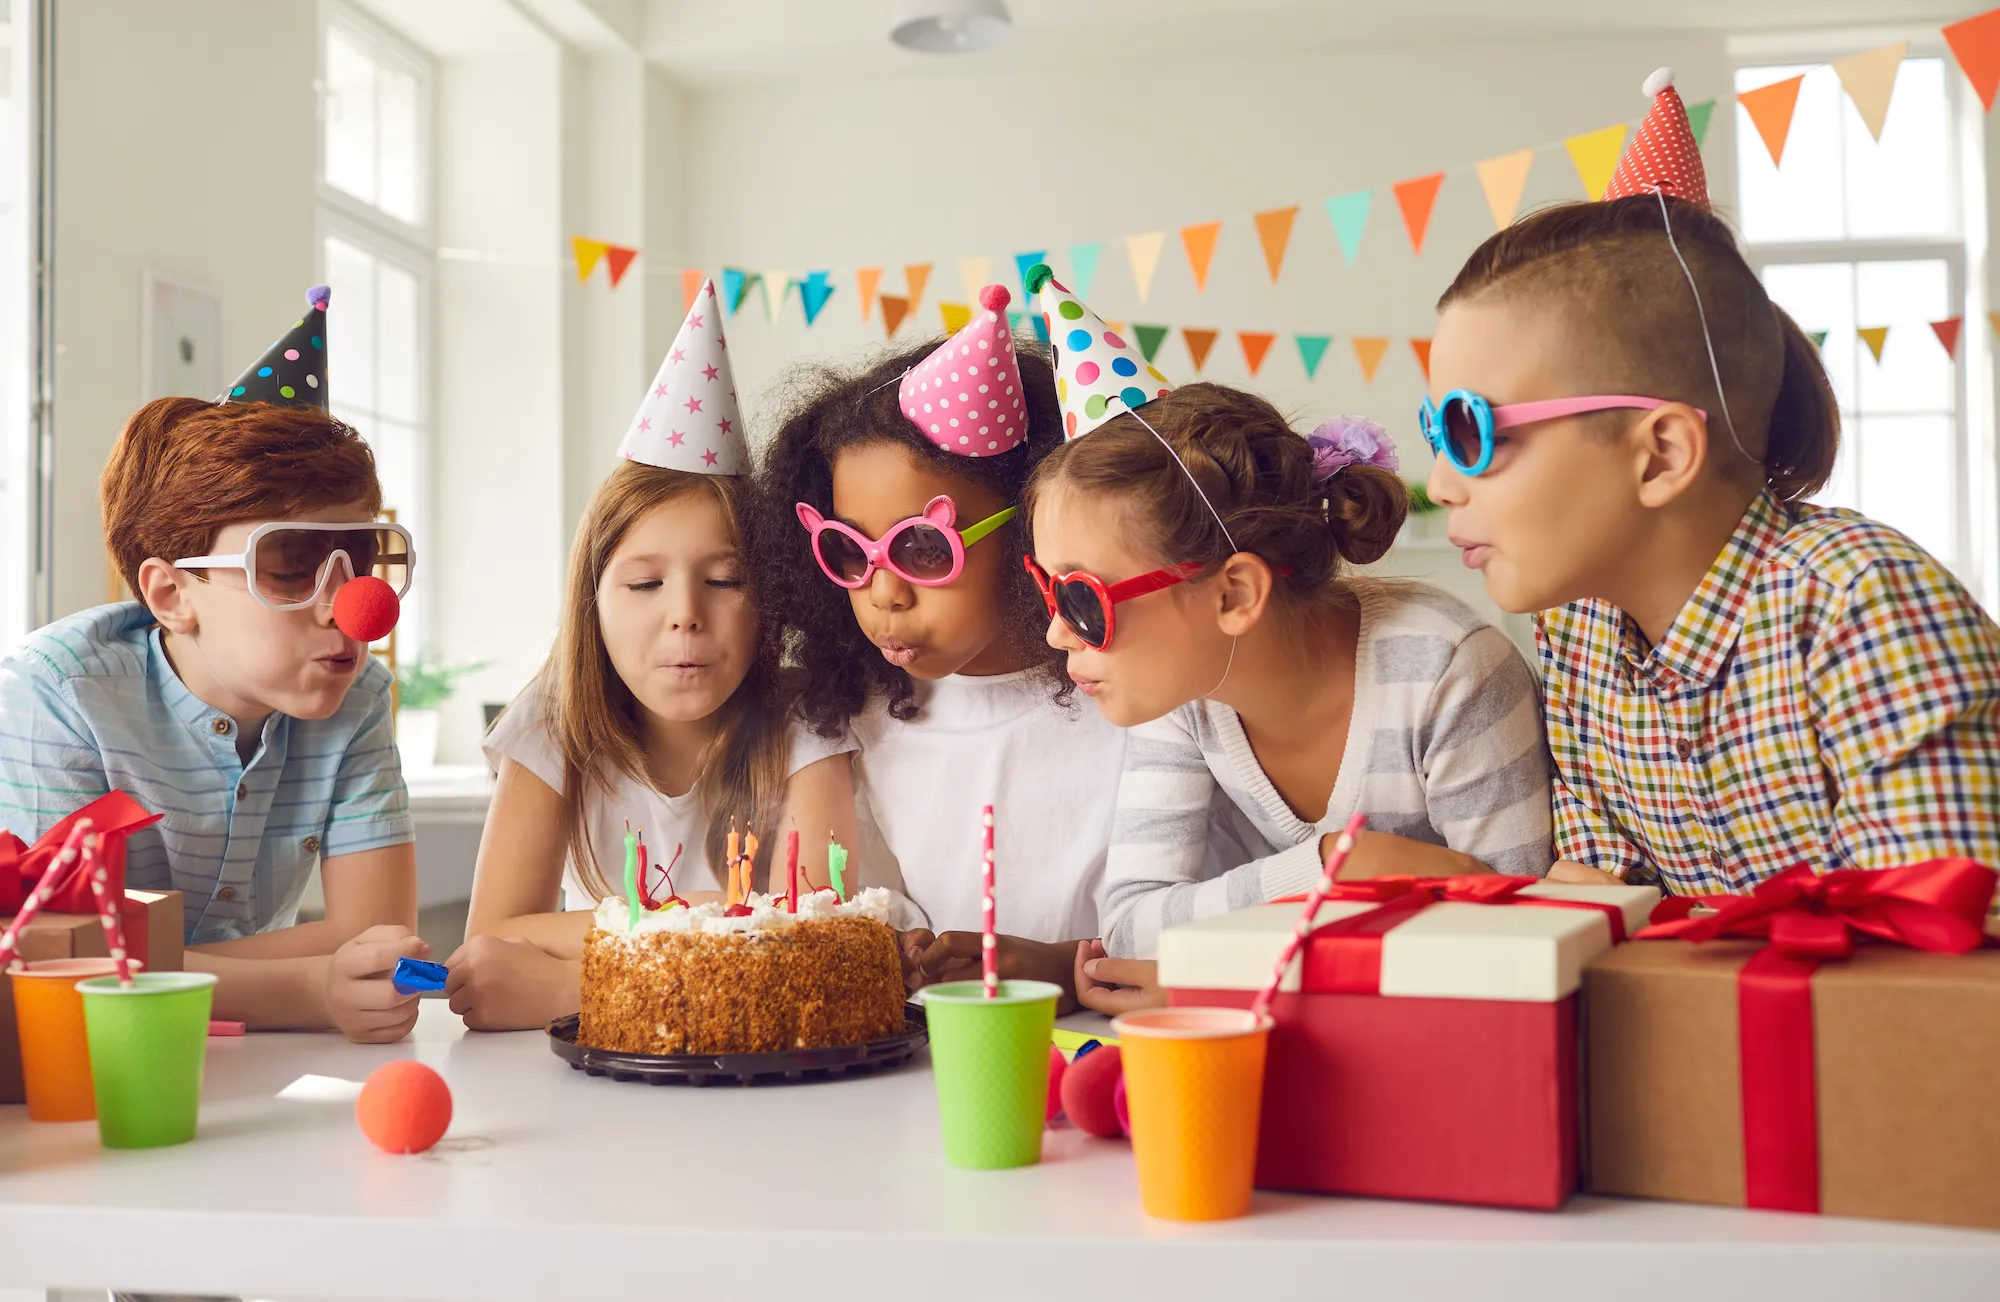 Save Big on Celebrations with Party City Online Coupons